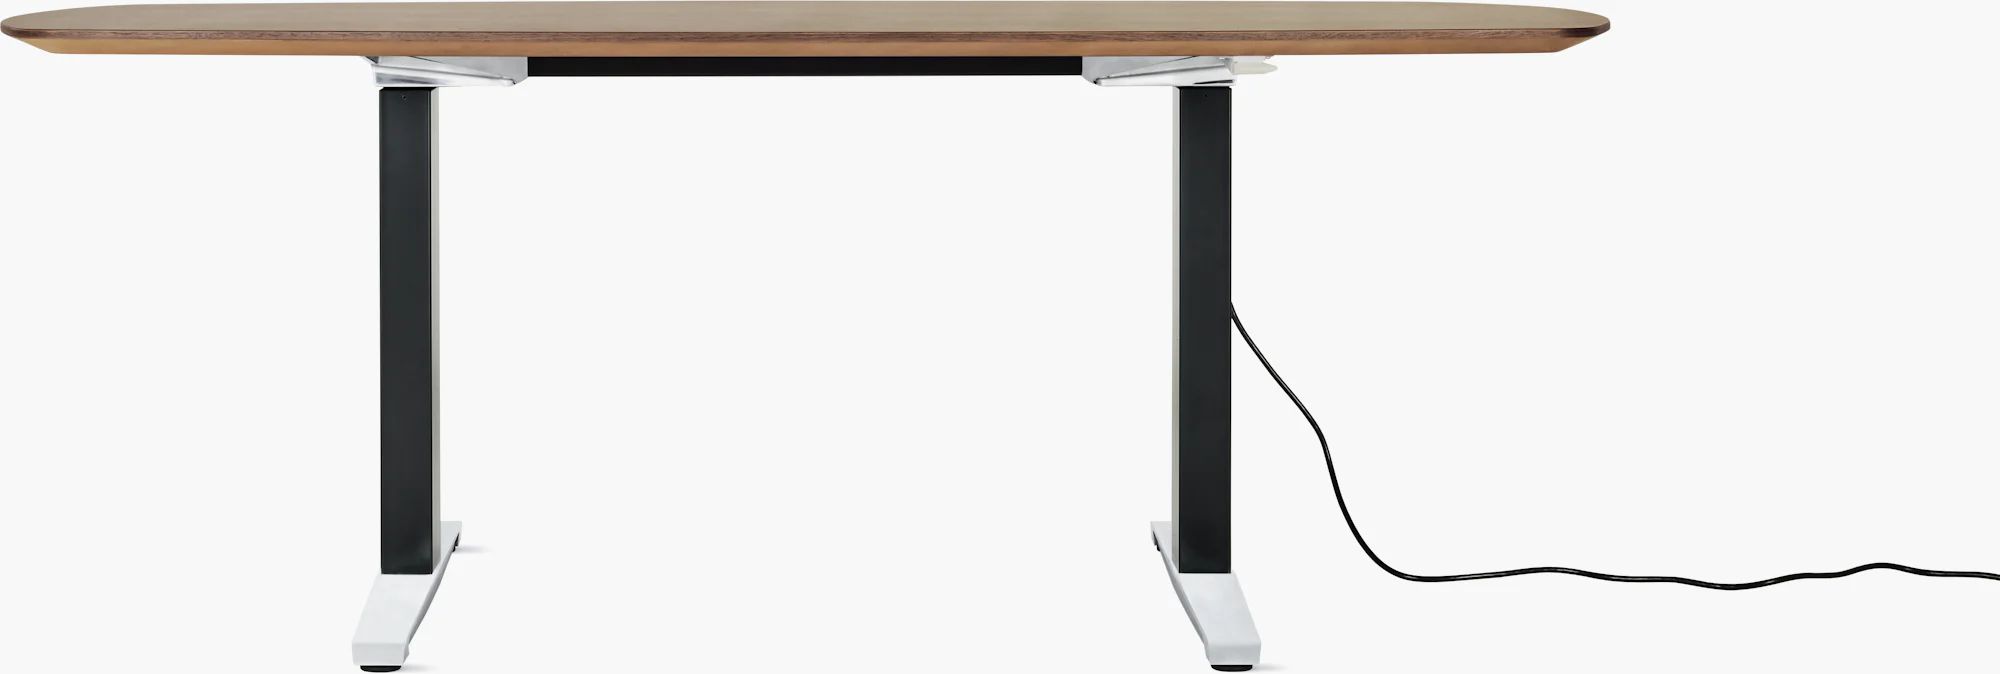 Renew Sit-To-Stand Desk | Design Within Reach